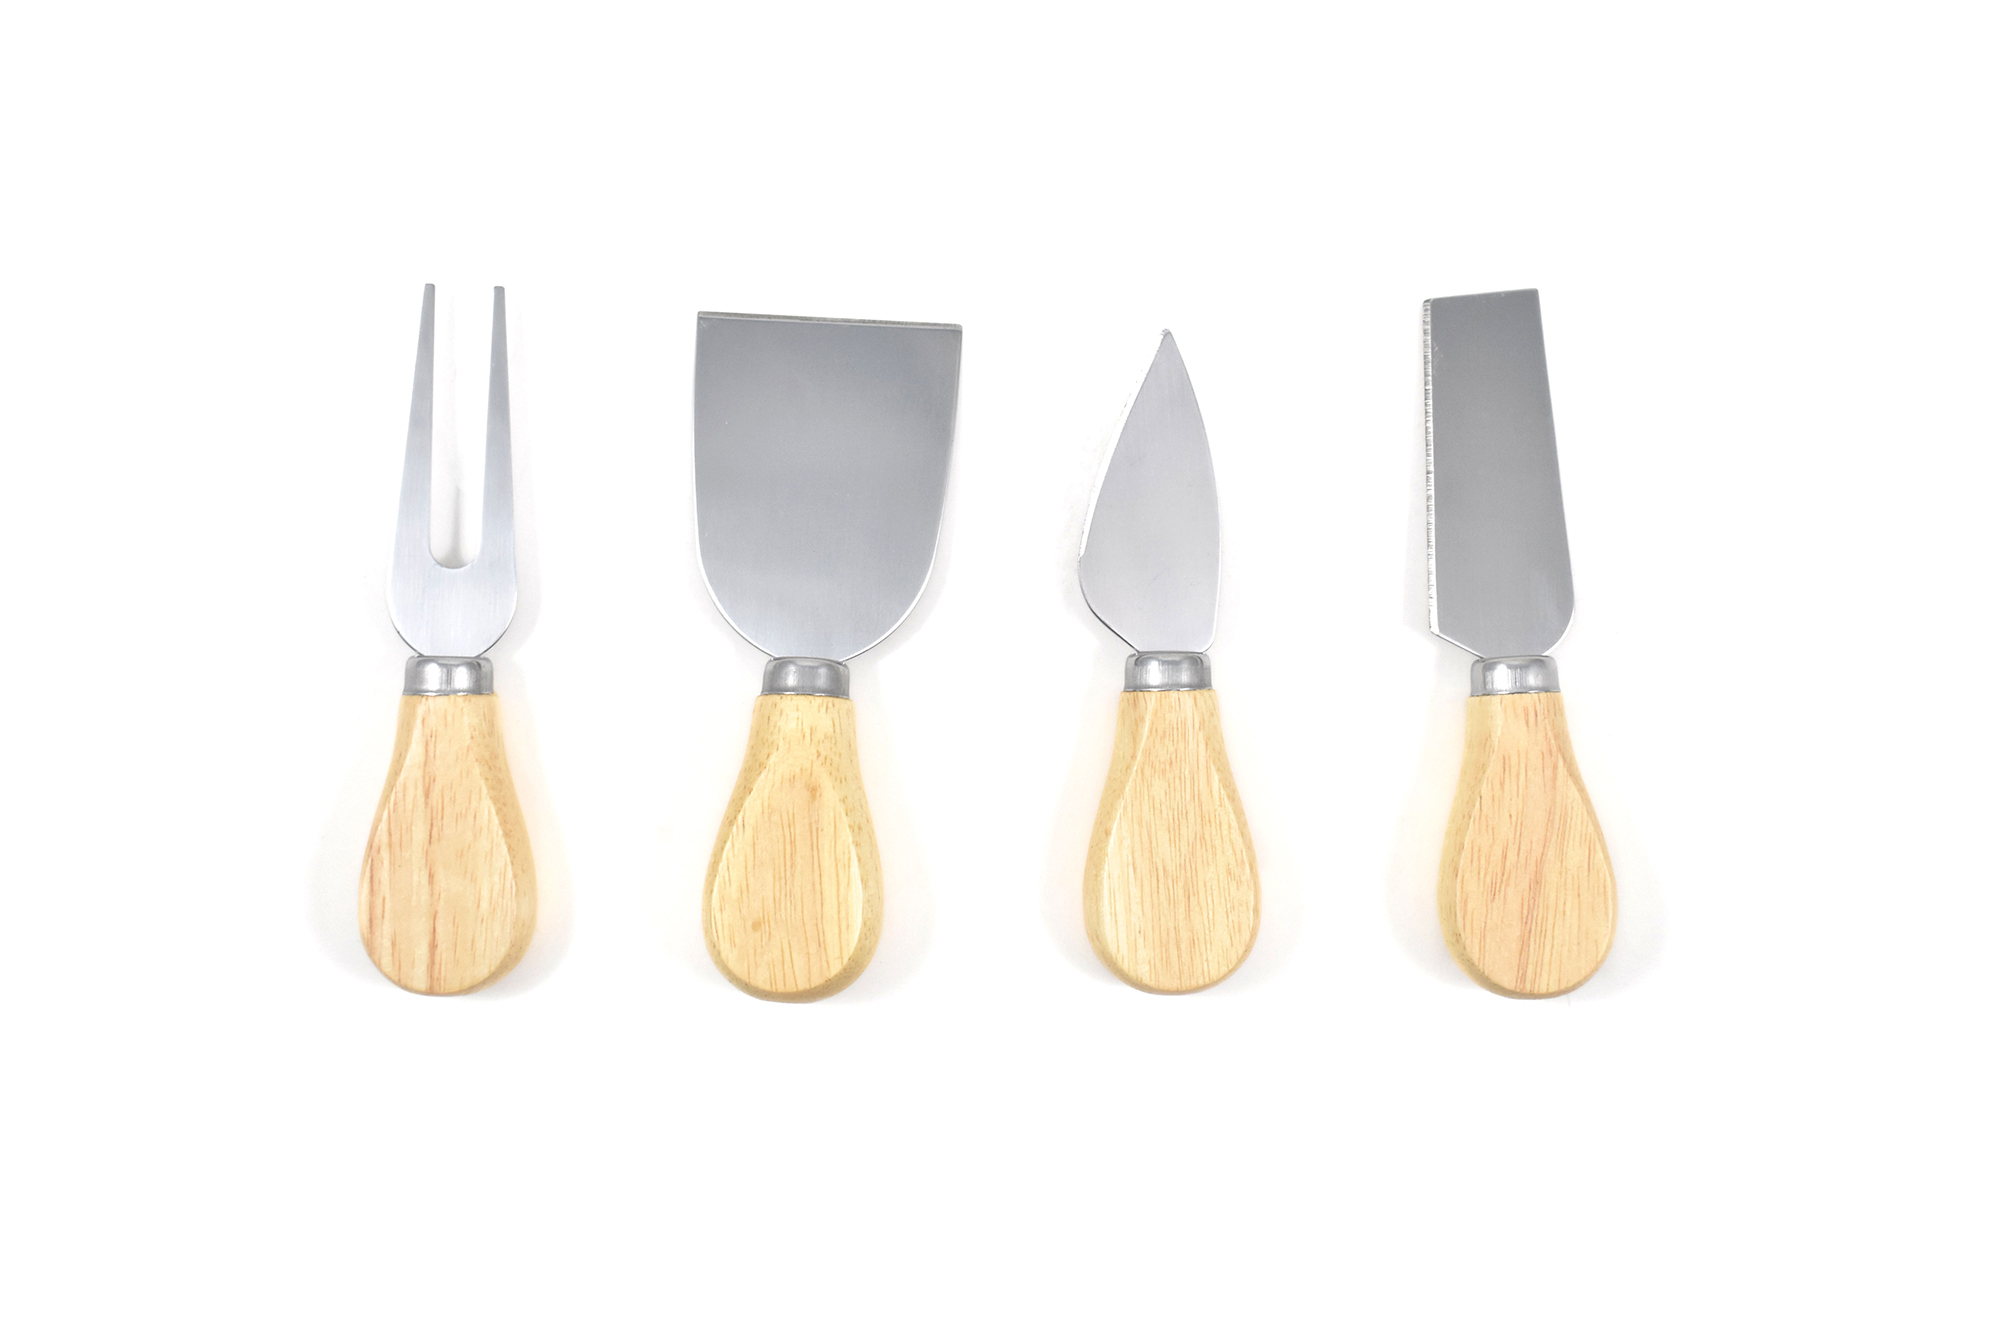 4 Piece Wood Cheese Knife Set